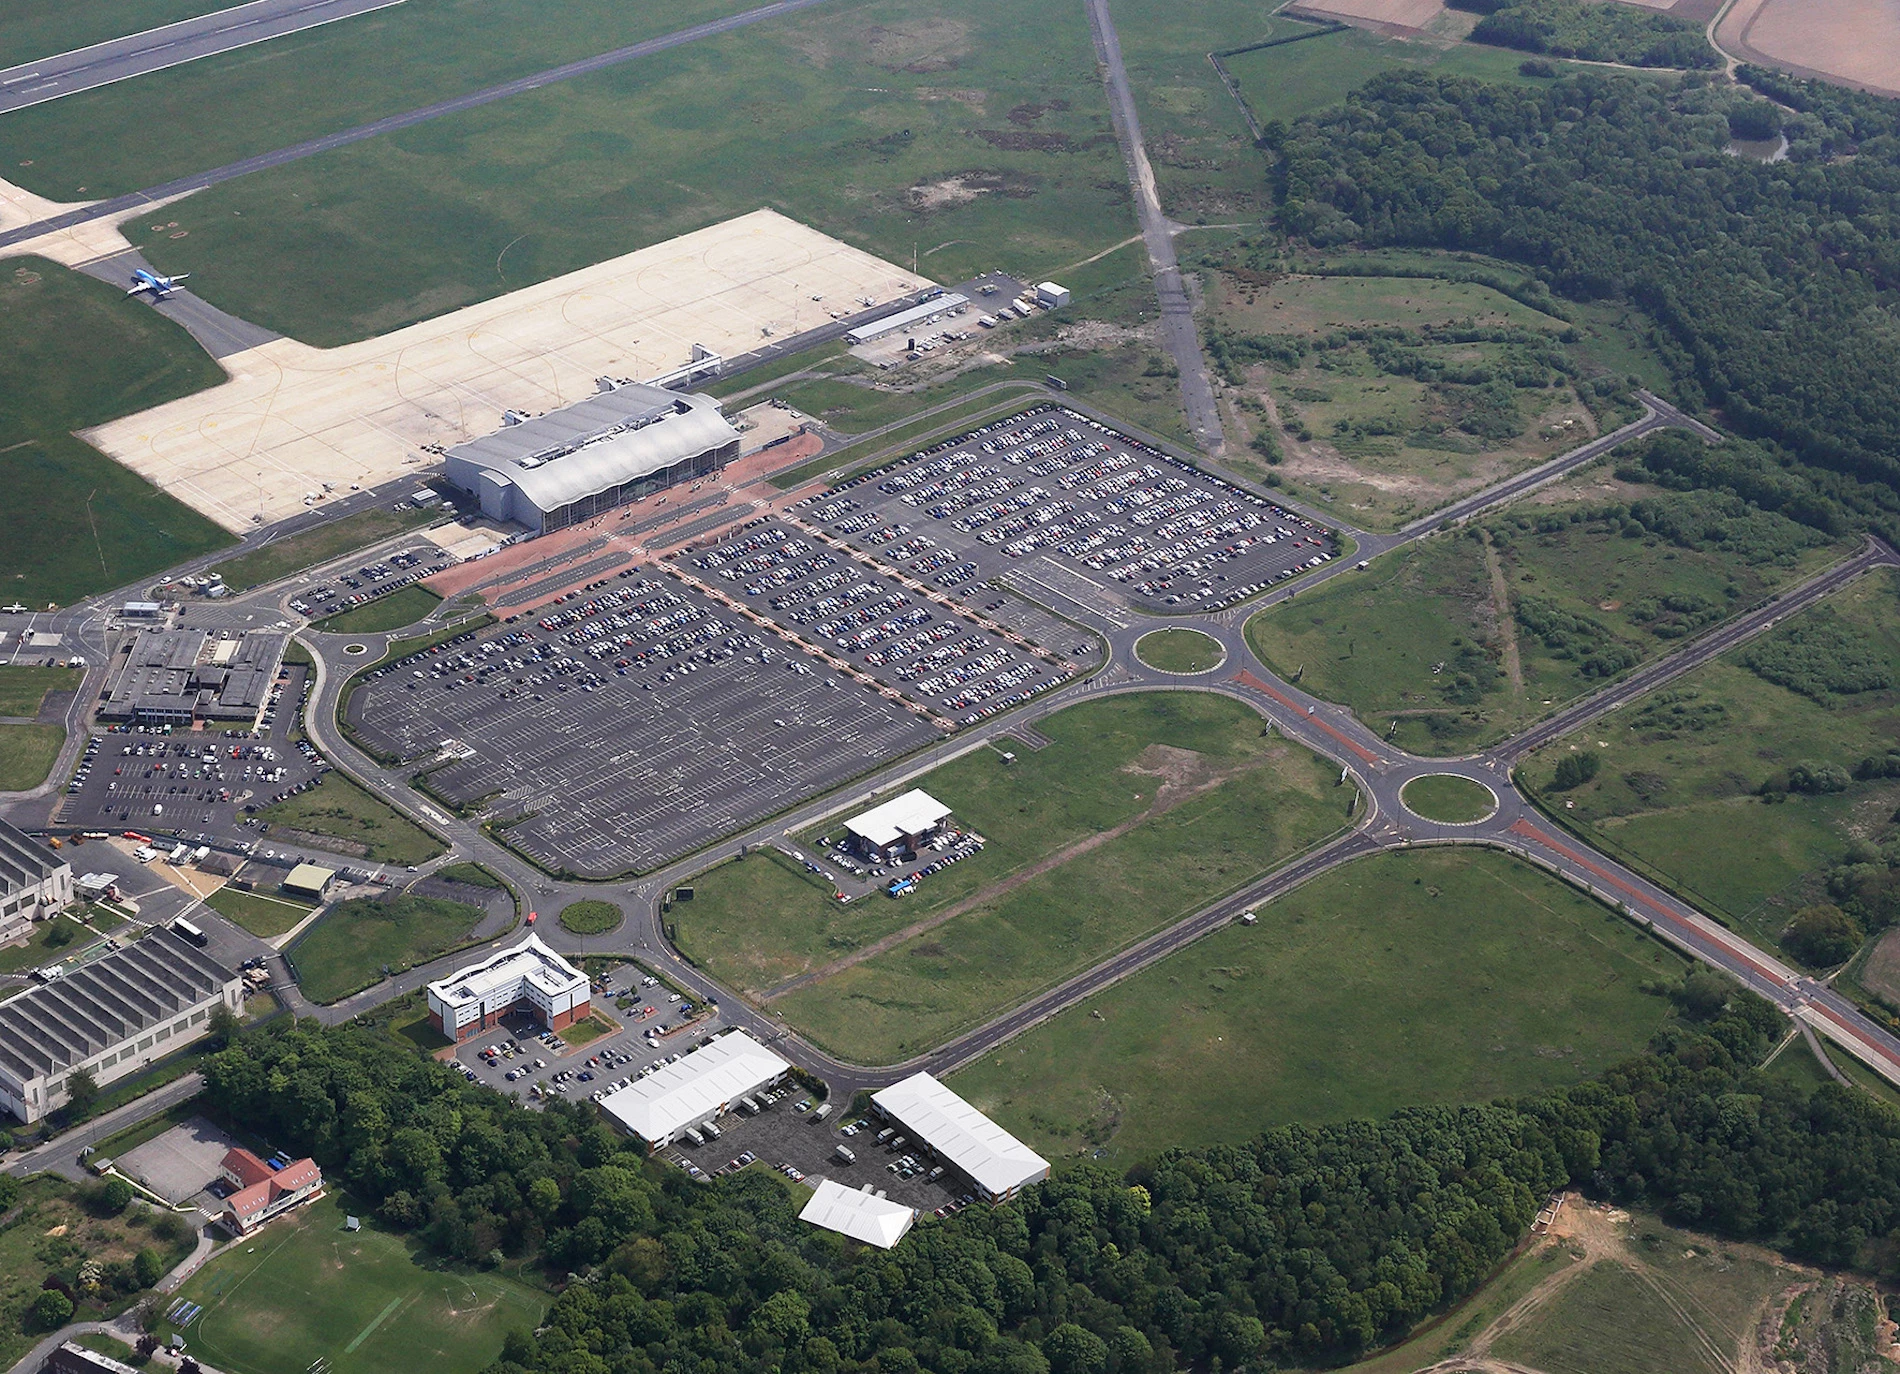 An aerial view showing the three blocks of units in the Skypark business park.